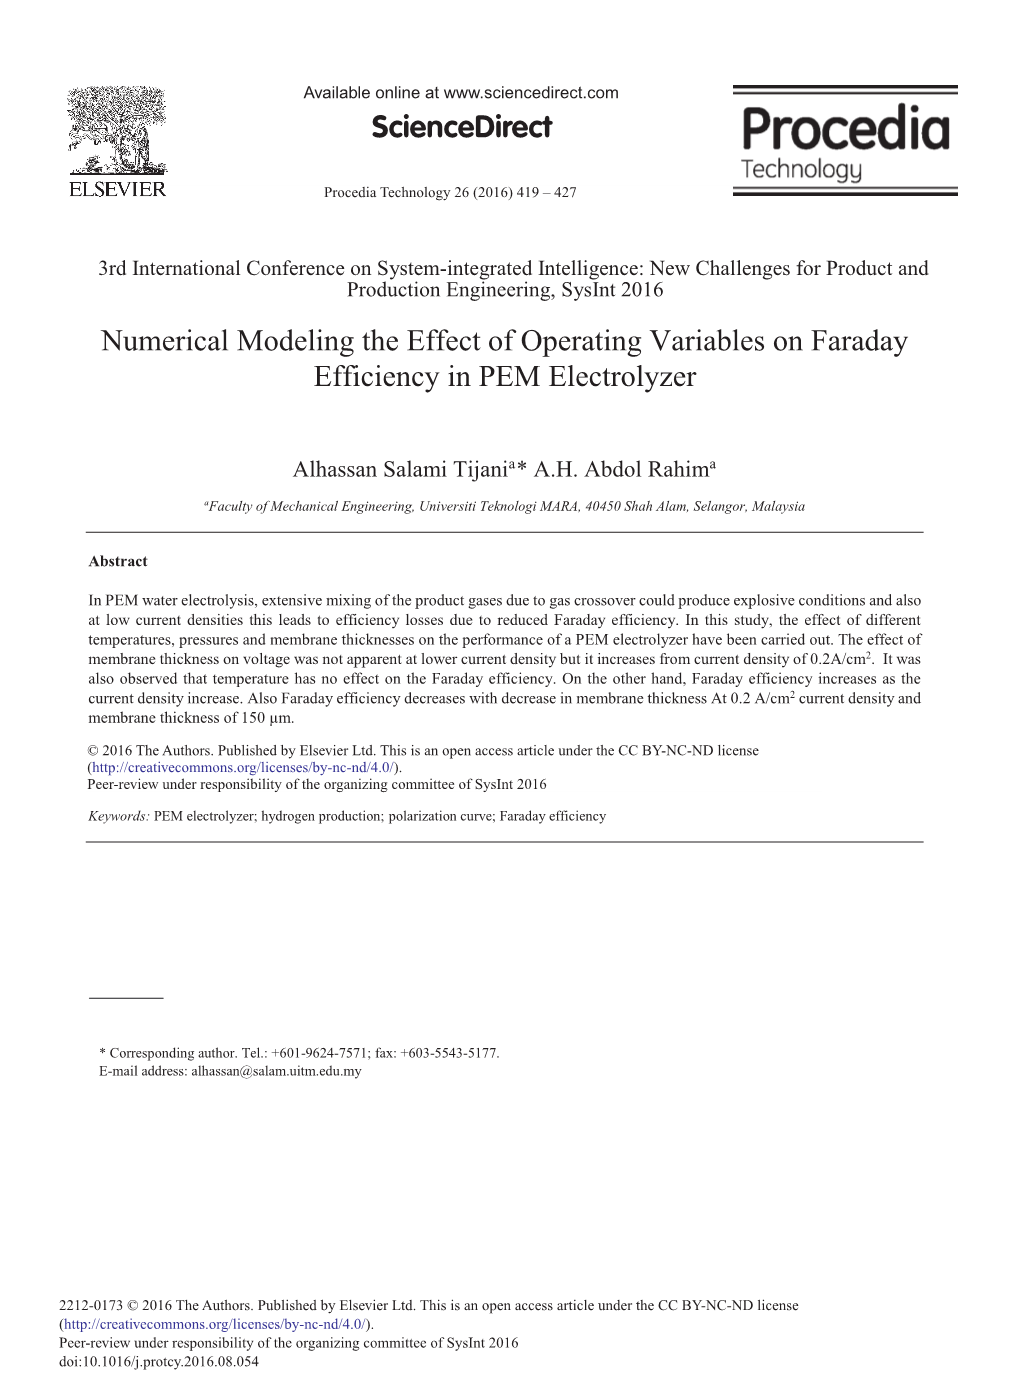 Numerical Modeling the Effect of Operating Variables on Faraday Efficiency in PEM Electrolyzer